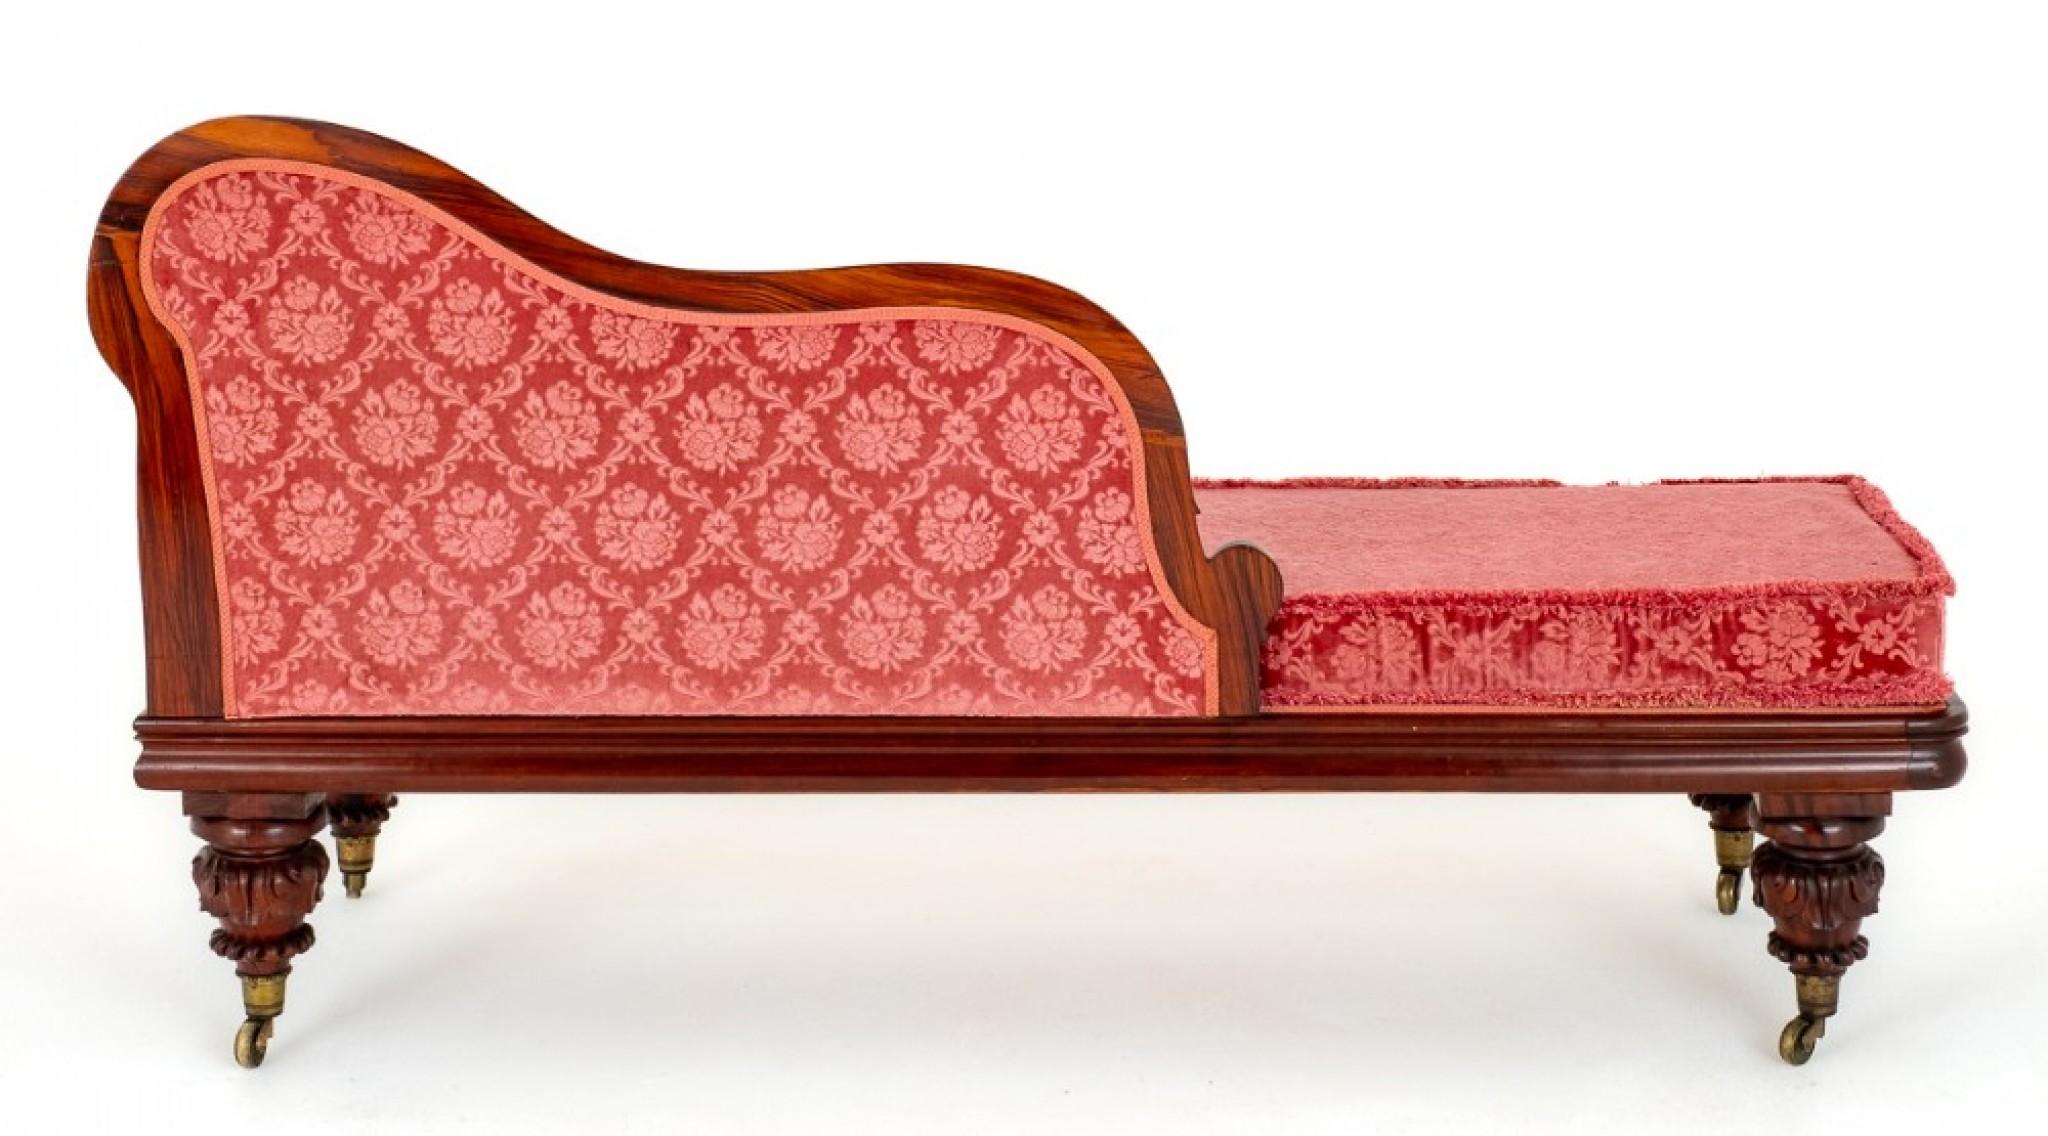 Period William IV Chaise Longue Chair Day Bed For Sale 5